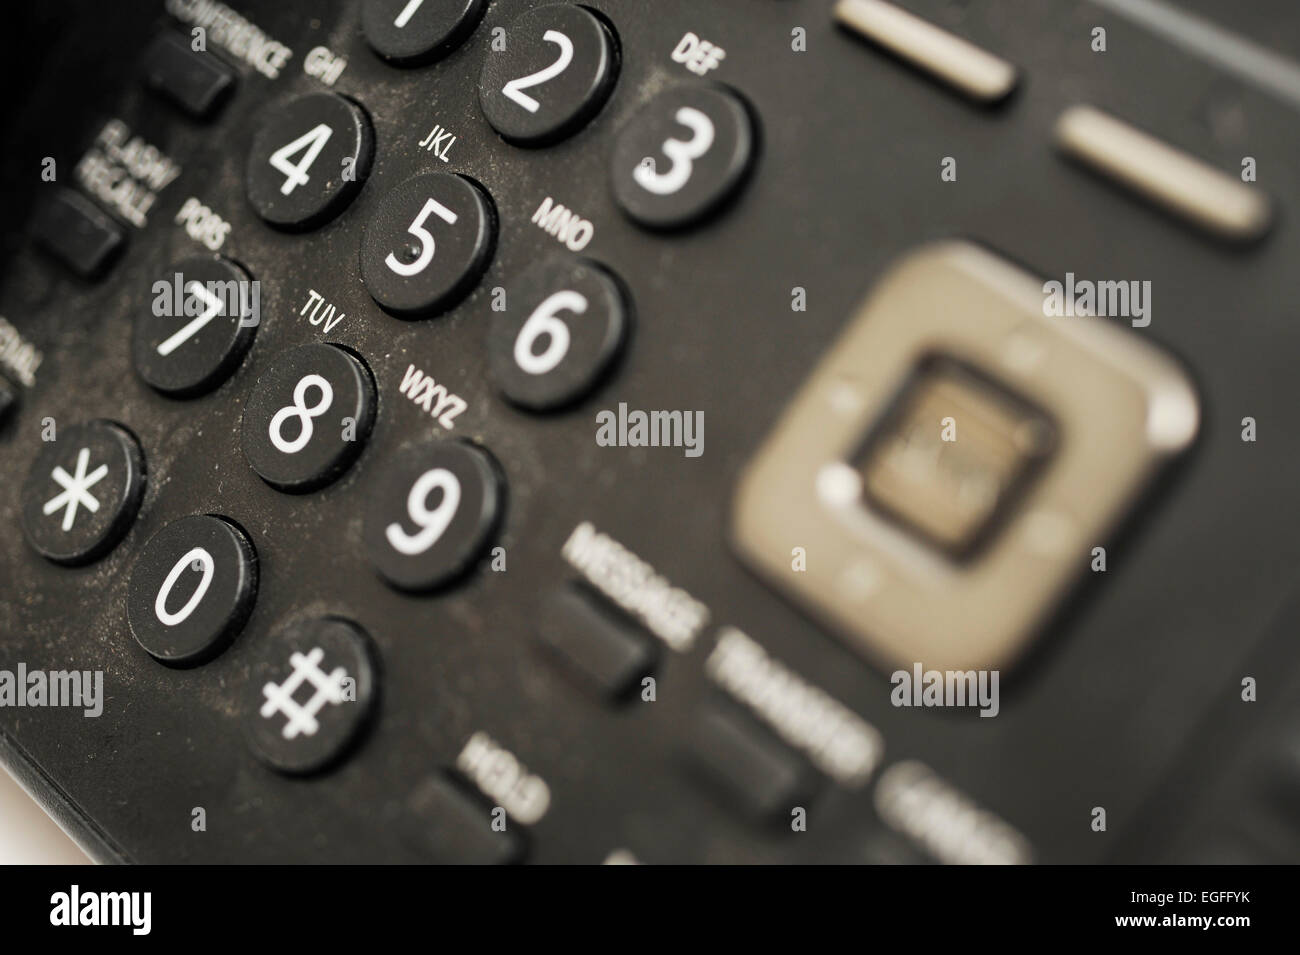 Close up of an Office Phone Stock Photo